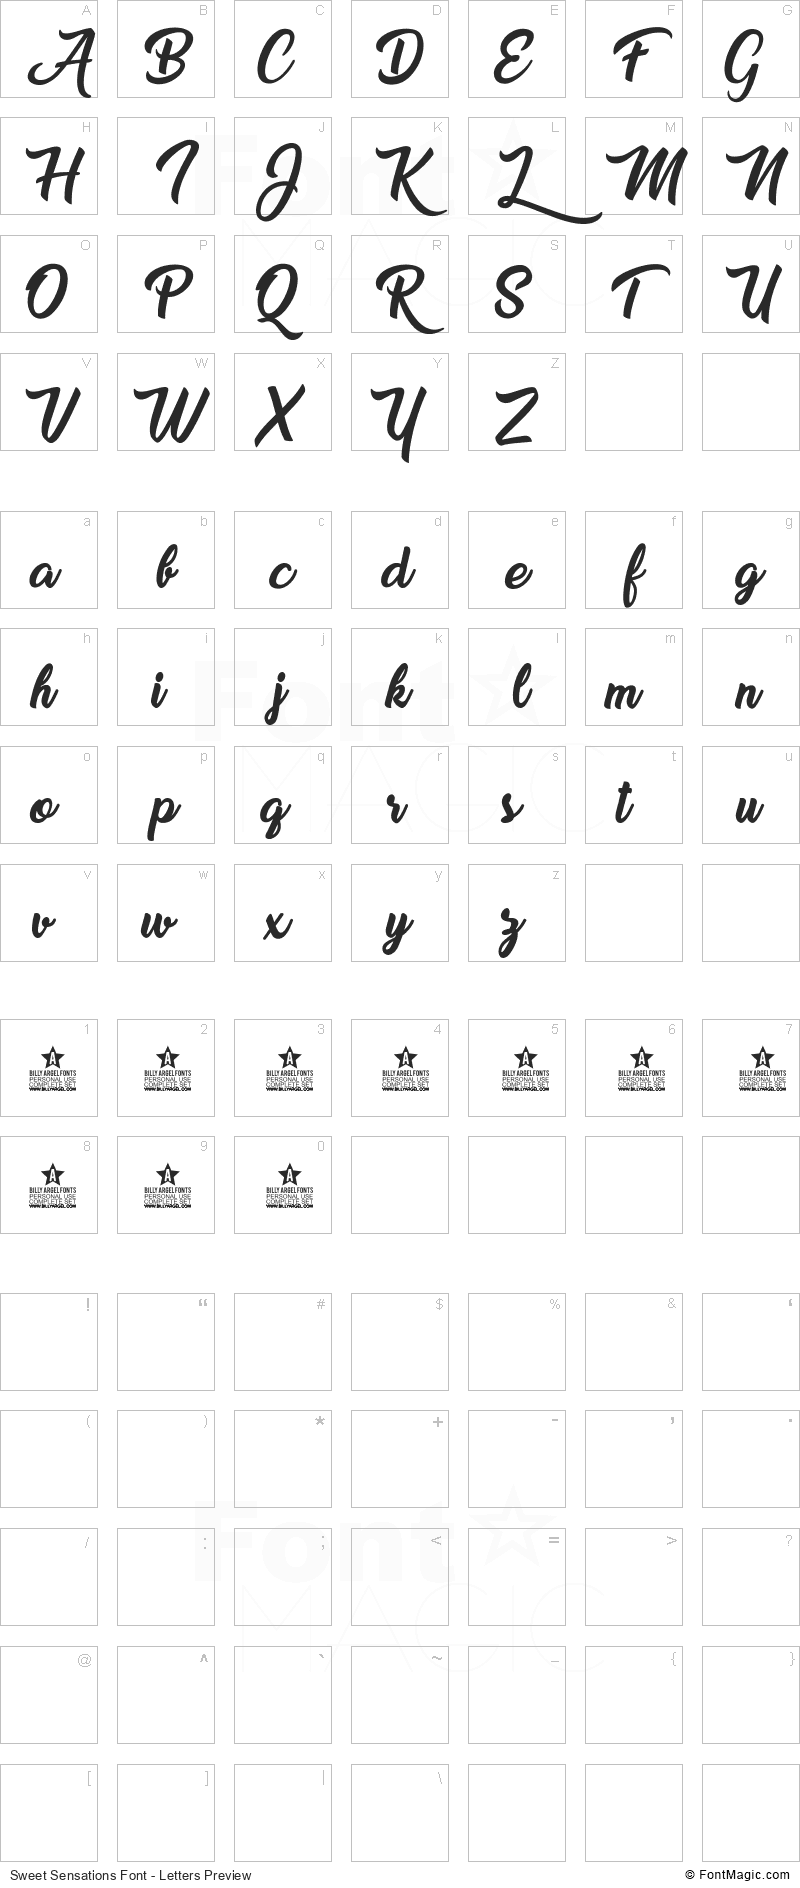 Sweet Sensations Font - All Latters Preview Chart